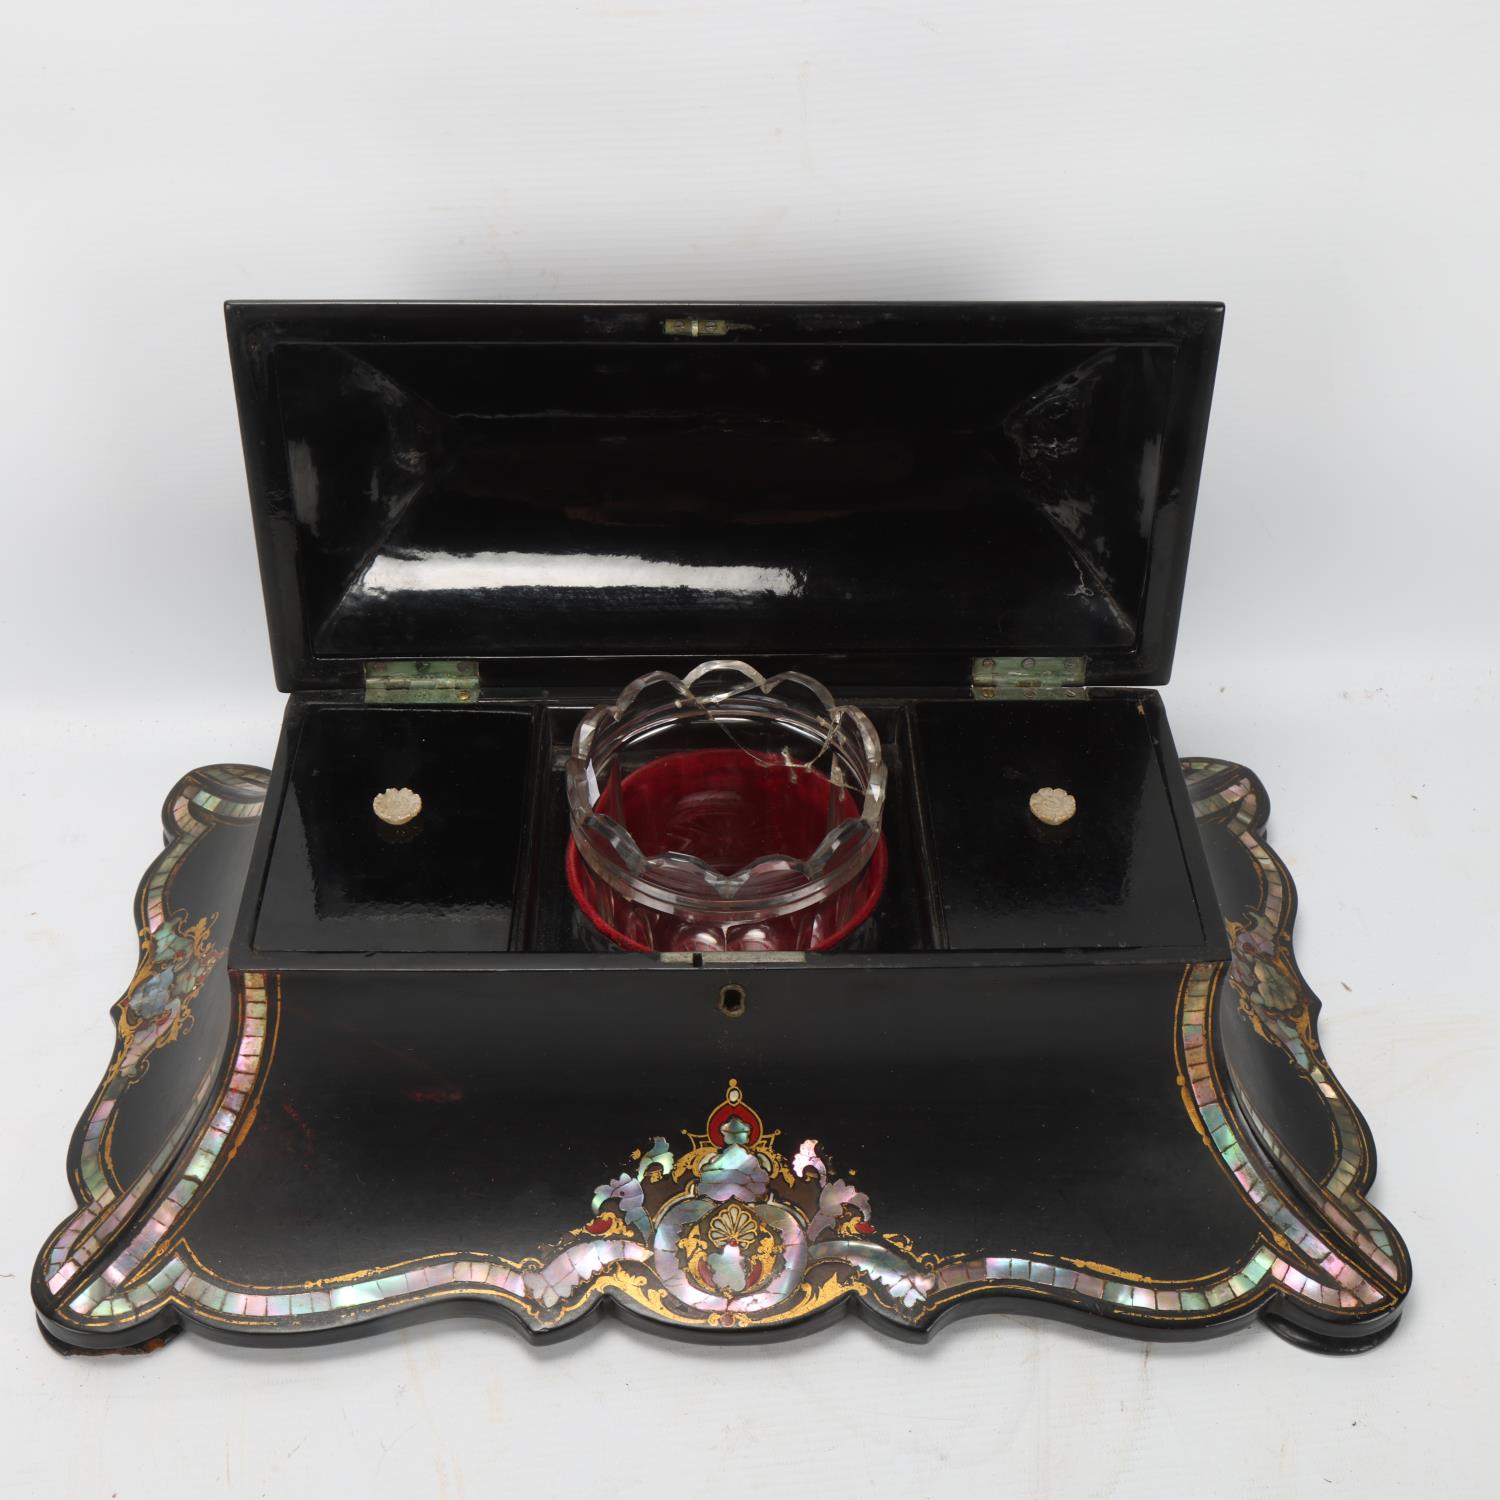 A 19th century papier mache tea caddy, inlaid mother-of-pearl and gilded decoration, with inner lids - Image 2 of 3